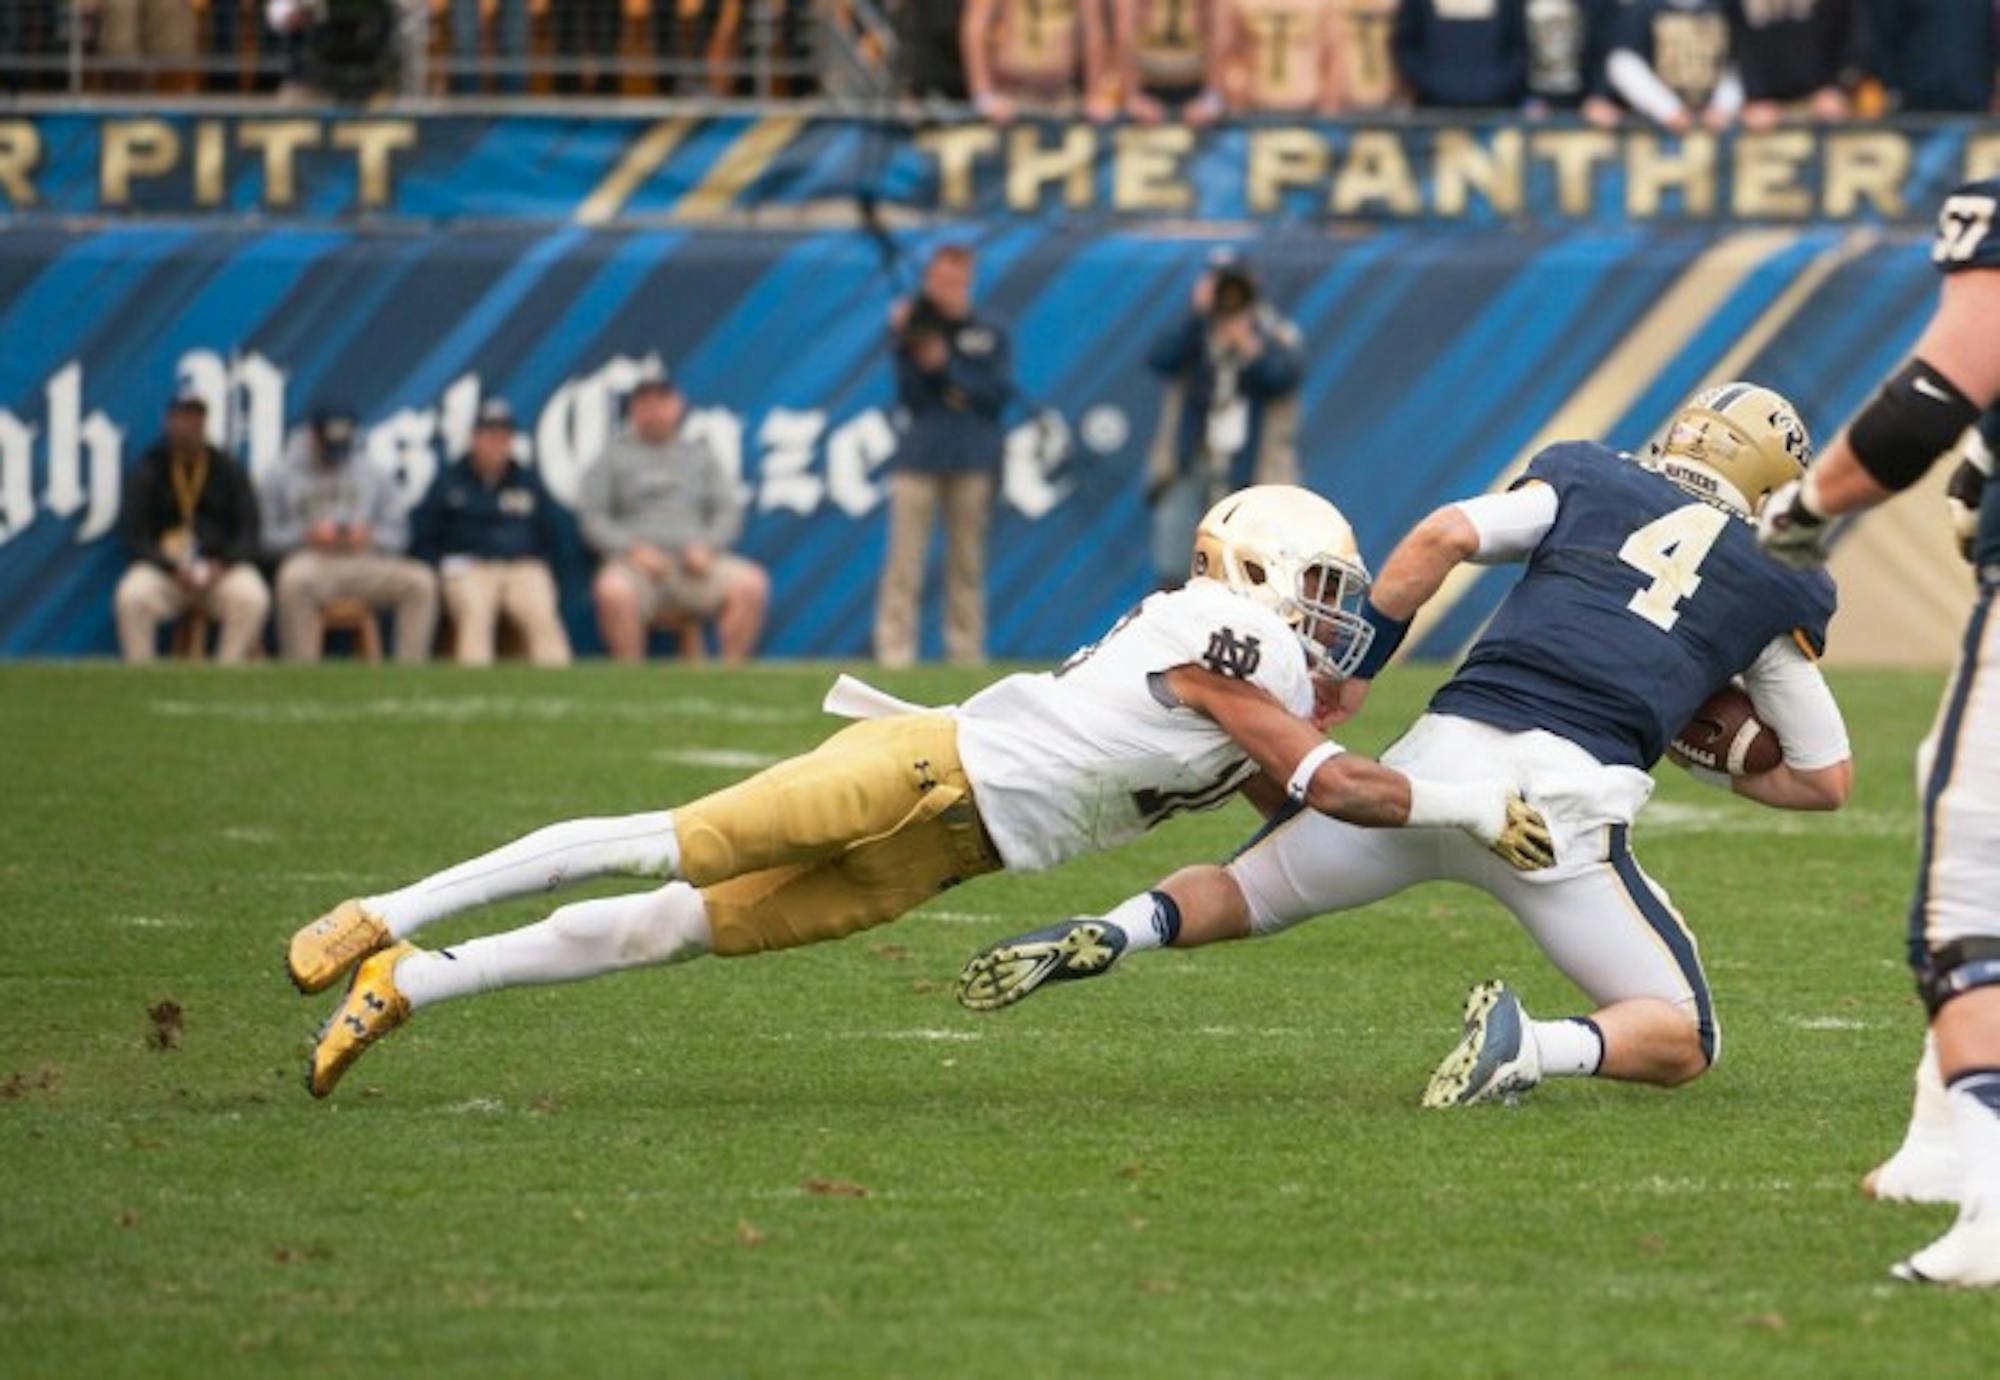 Irish senior safety Max Redfield takes down Pittsburgh quarterback Nate Peterman during Notre Dame’s 42-30 win over the Panthers at Heinz Field in Pittsburgh. Redfield, who missed the Fiesta Bowl defeat to Ohio State after violating team rules, is one of five returning starters for the Irish on defense heading into the 2016 season.